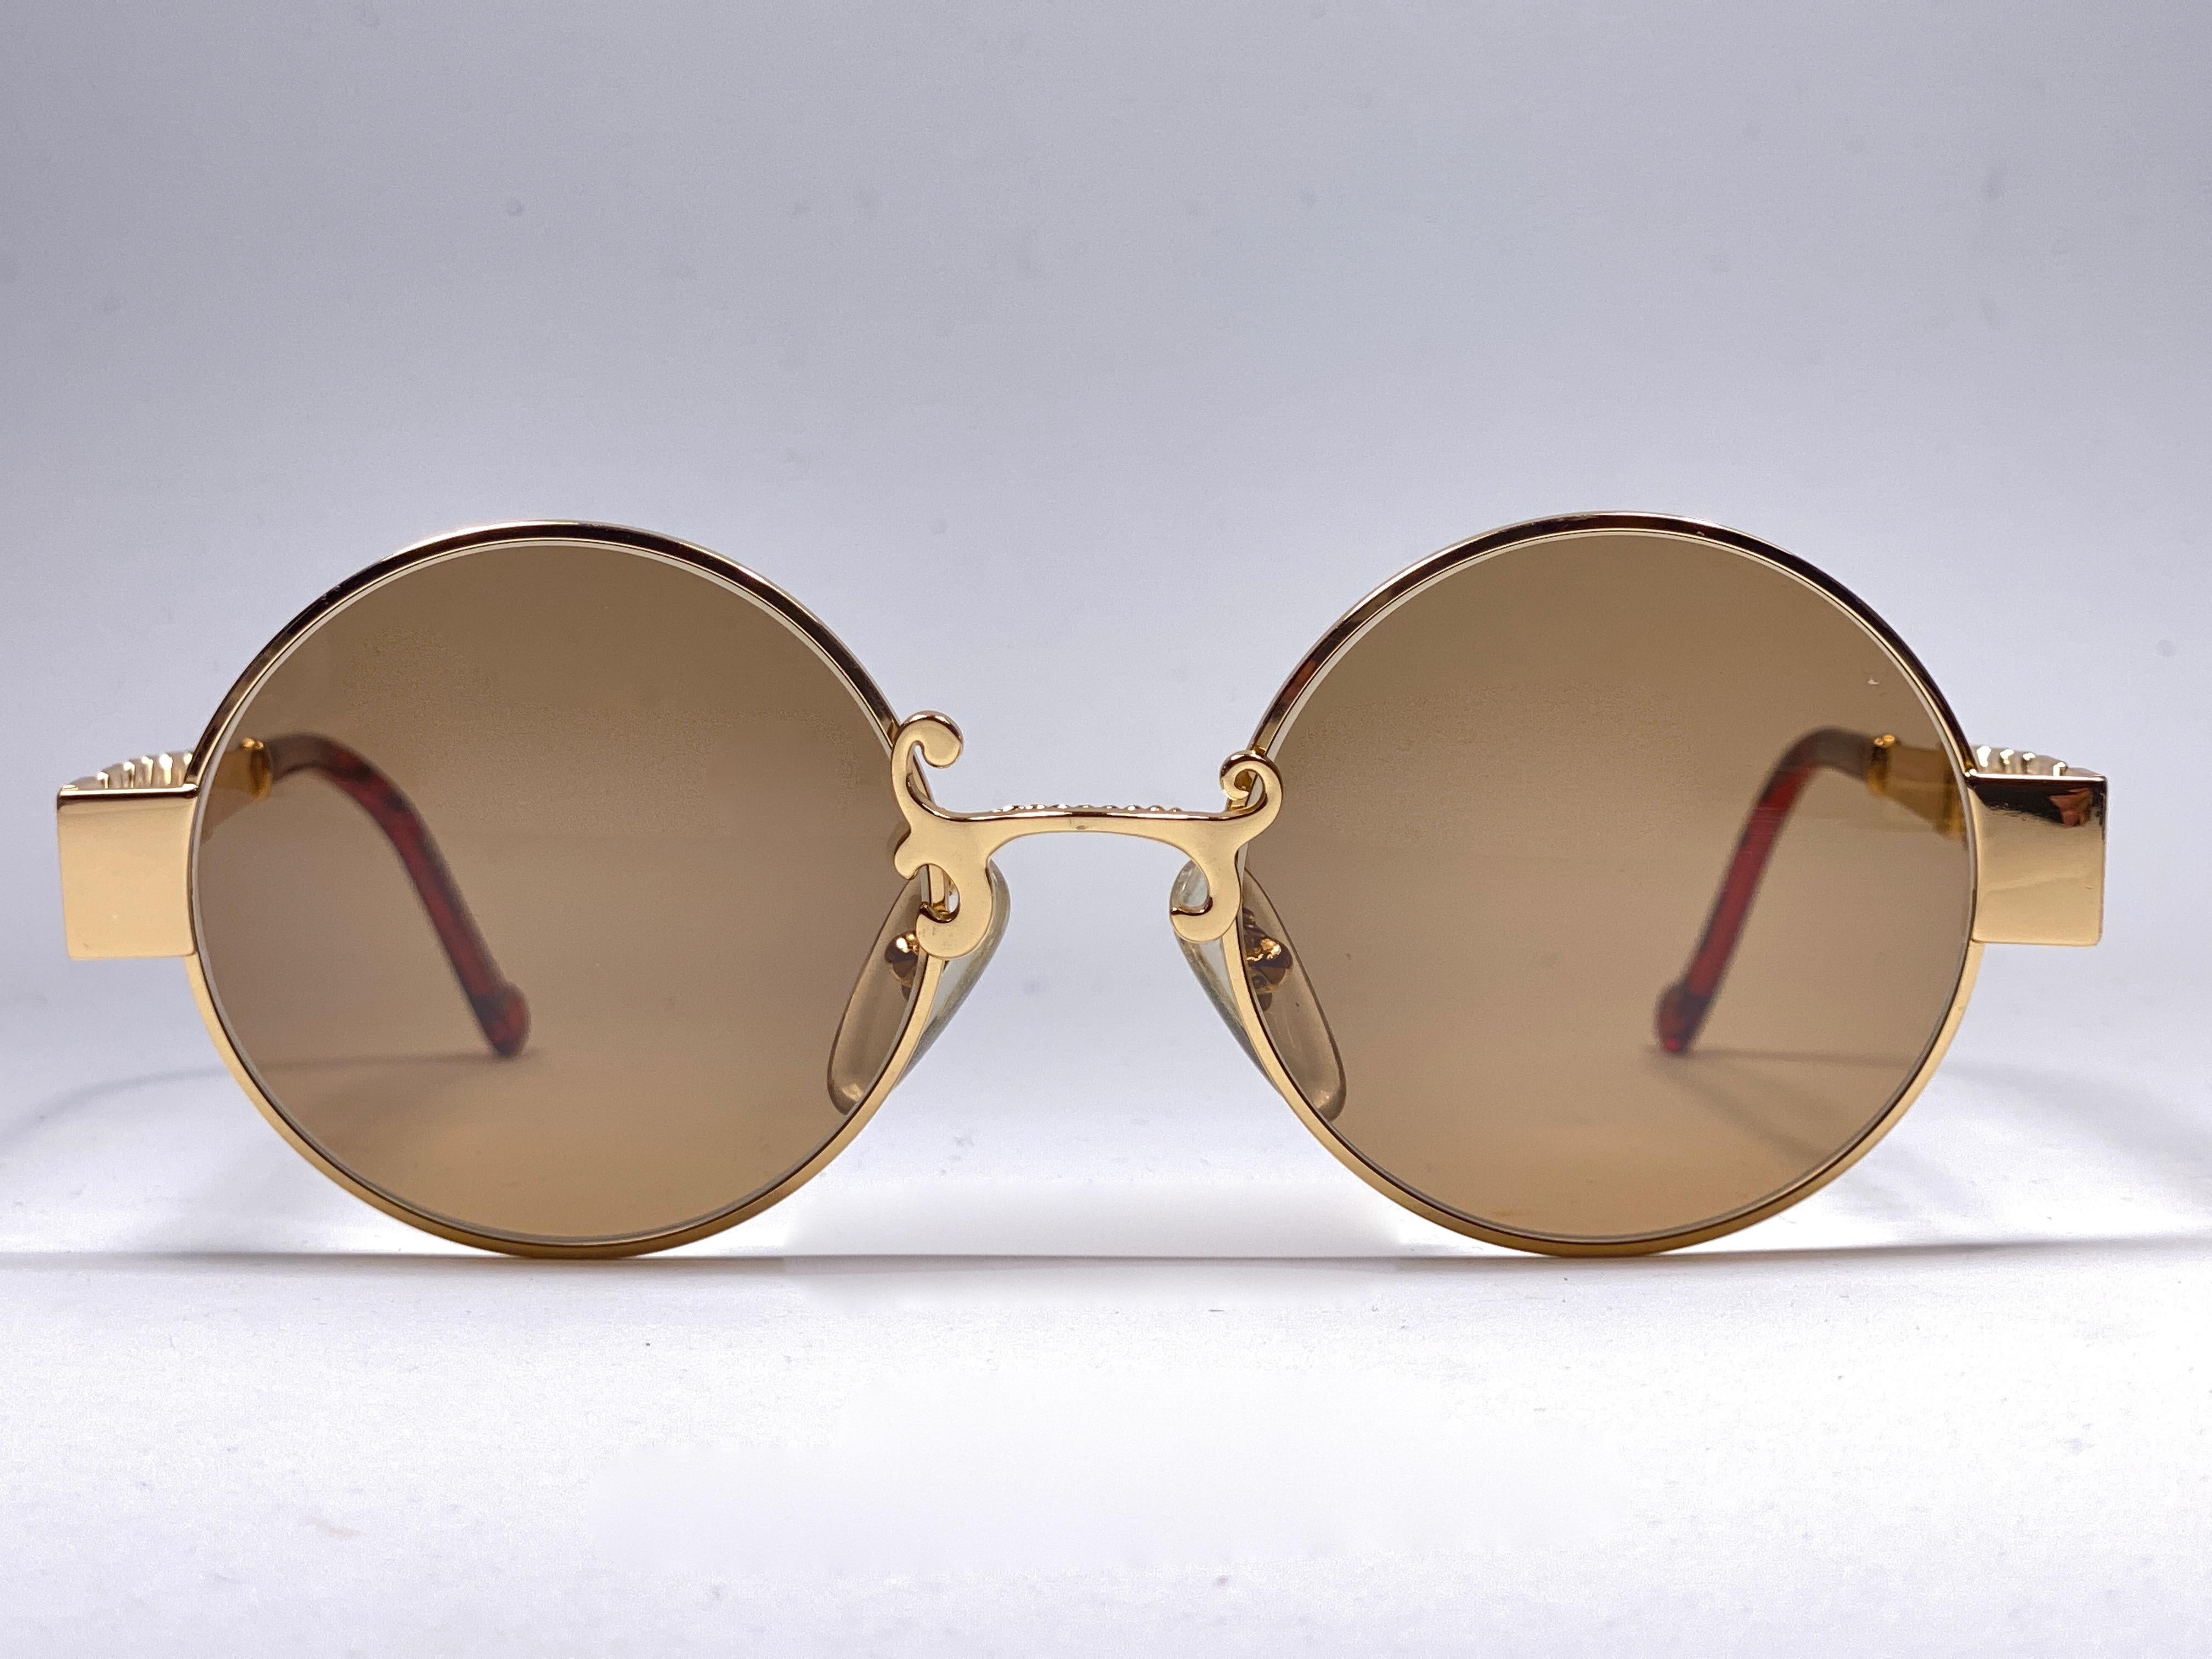 Superb & rare pair of vintage Christian Lacroix sunglasses.    

Spotless medium brown lenses.

New, never worn or displayed. Please notice this item its nearly 40 years old and may show minor sign of wear due to storage.

 Made in France.

Front :